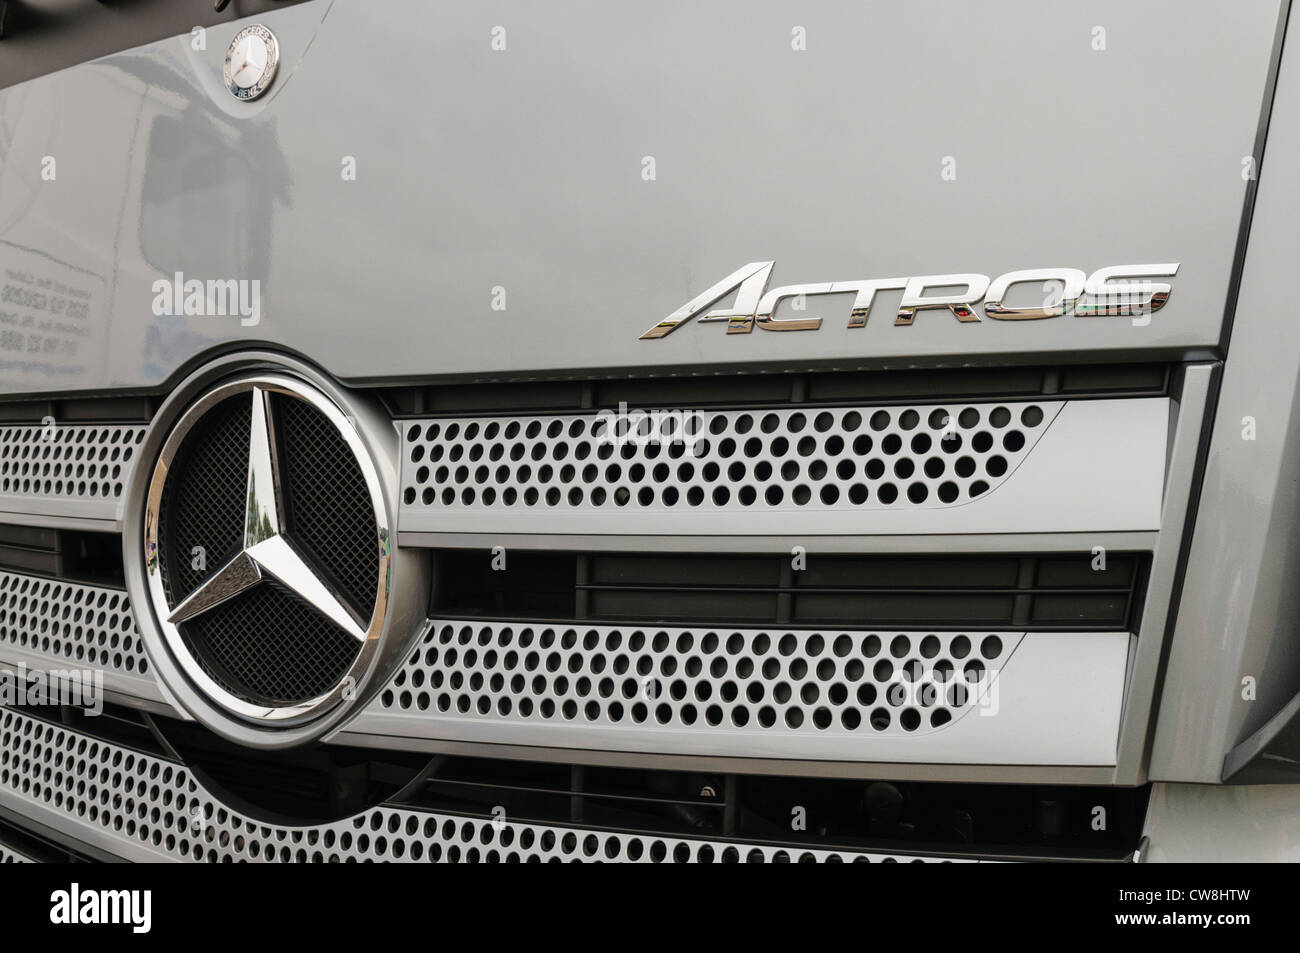 Front of a Mercedes Benz Actros lorry/truck Stock Photo